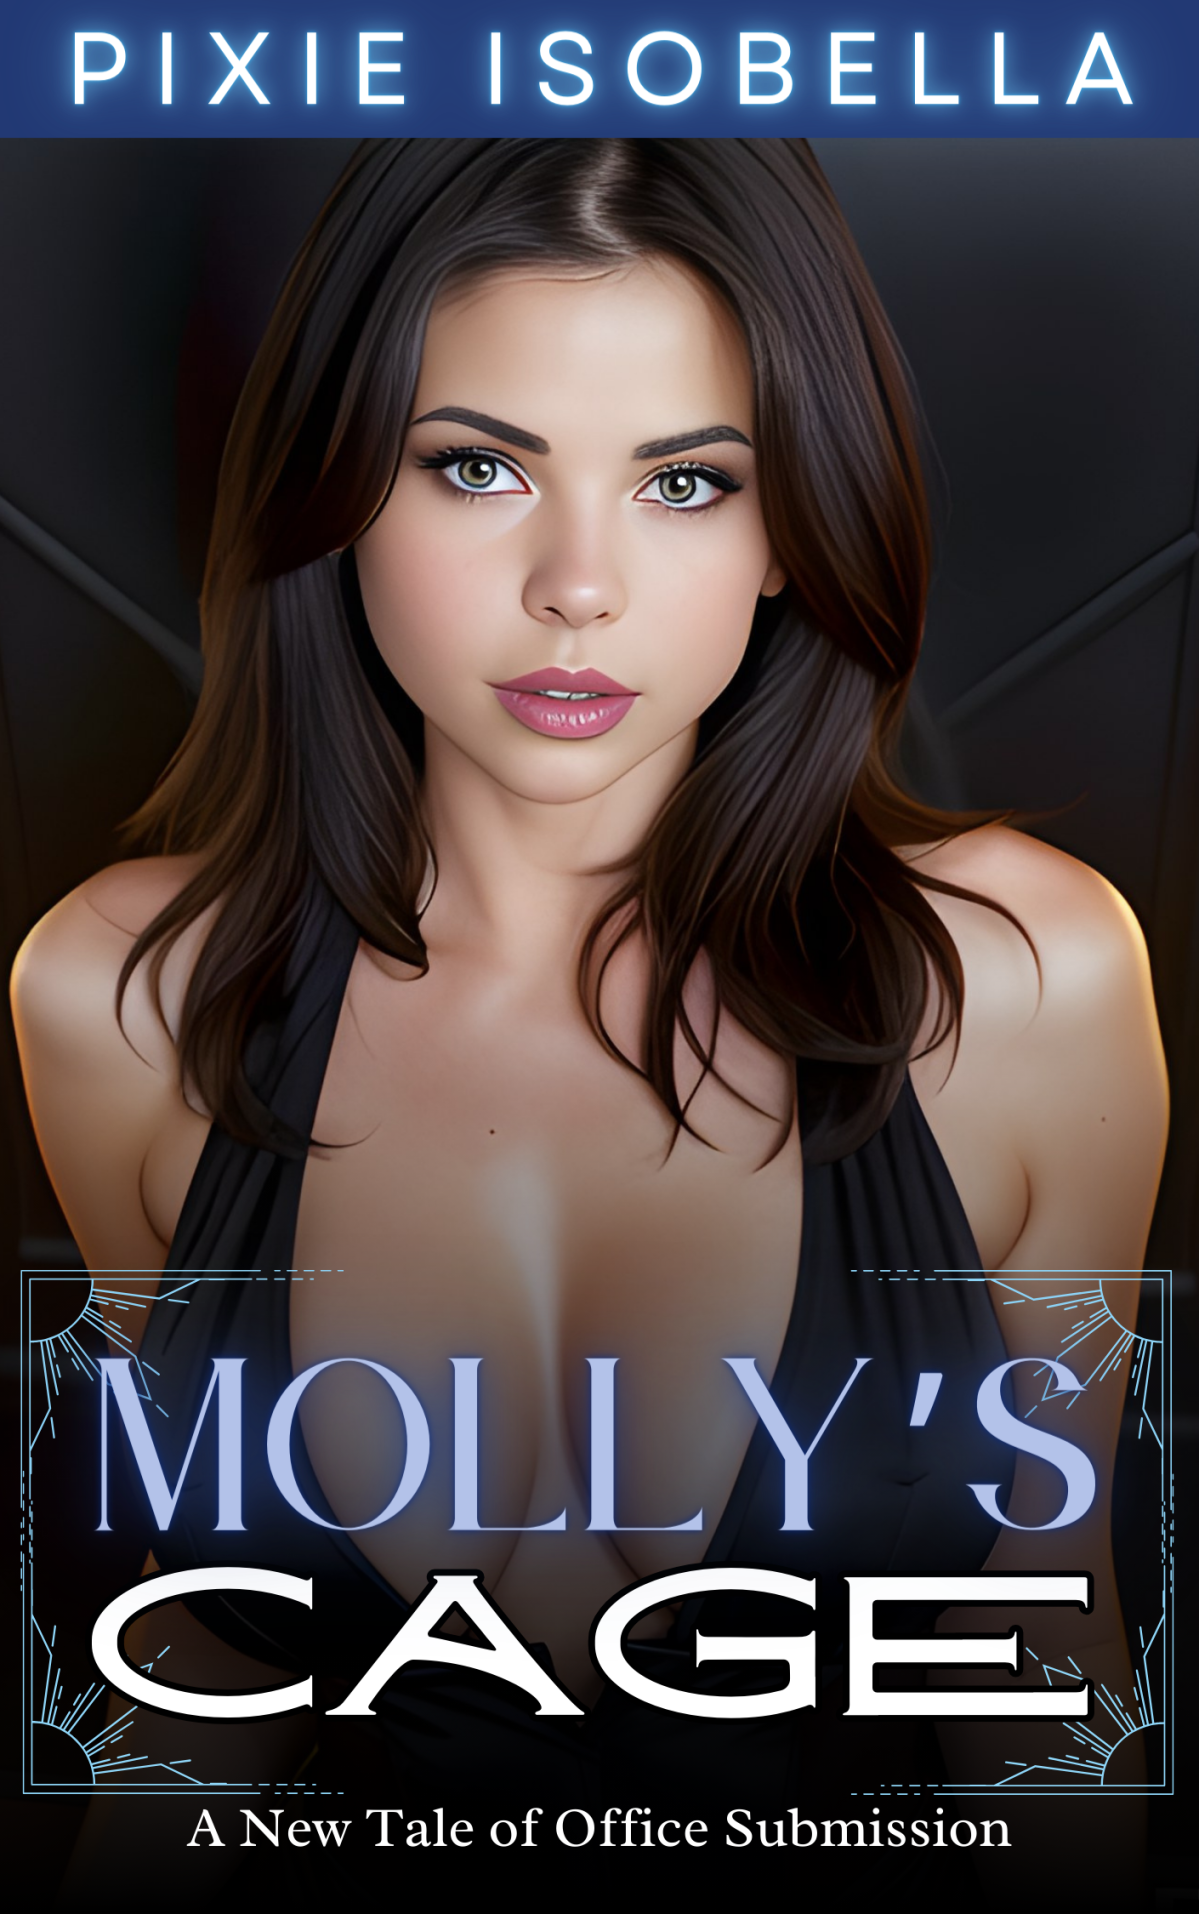 Now Available – Molly’s Cage!